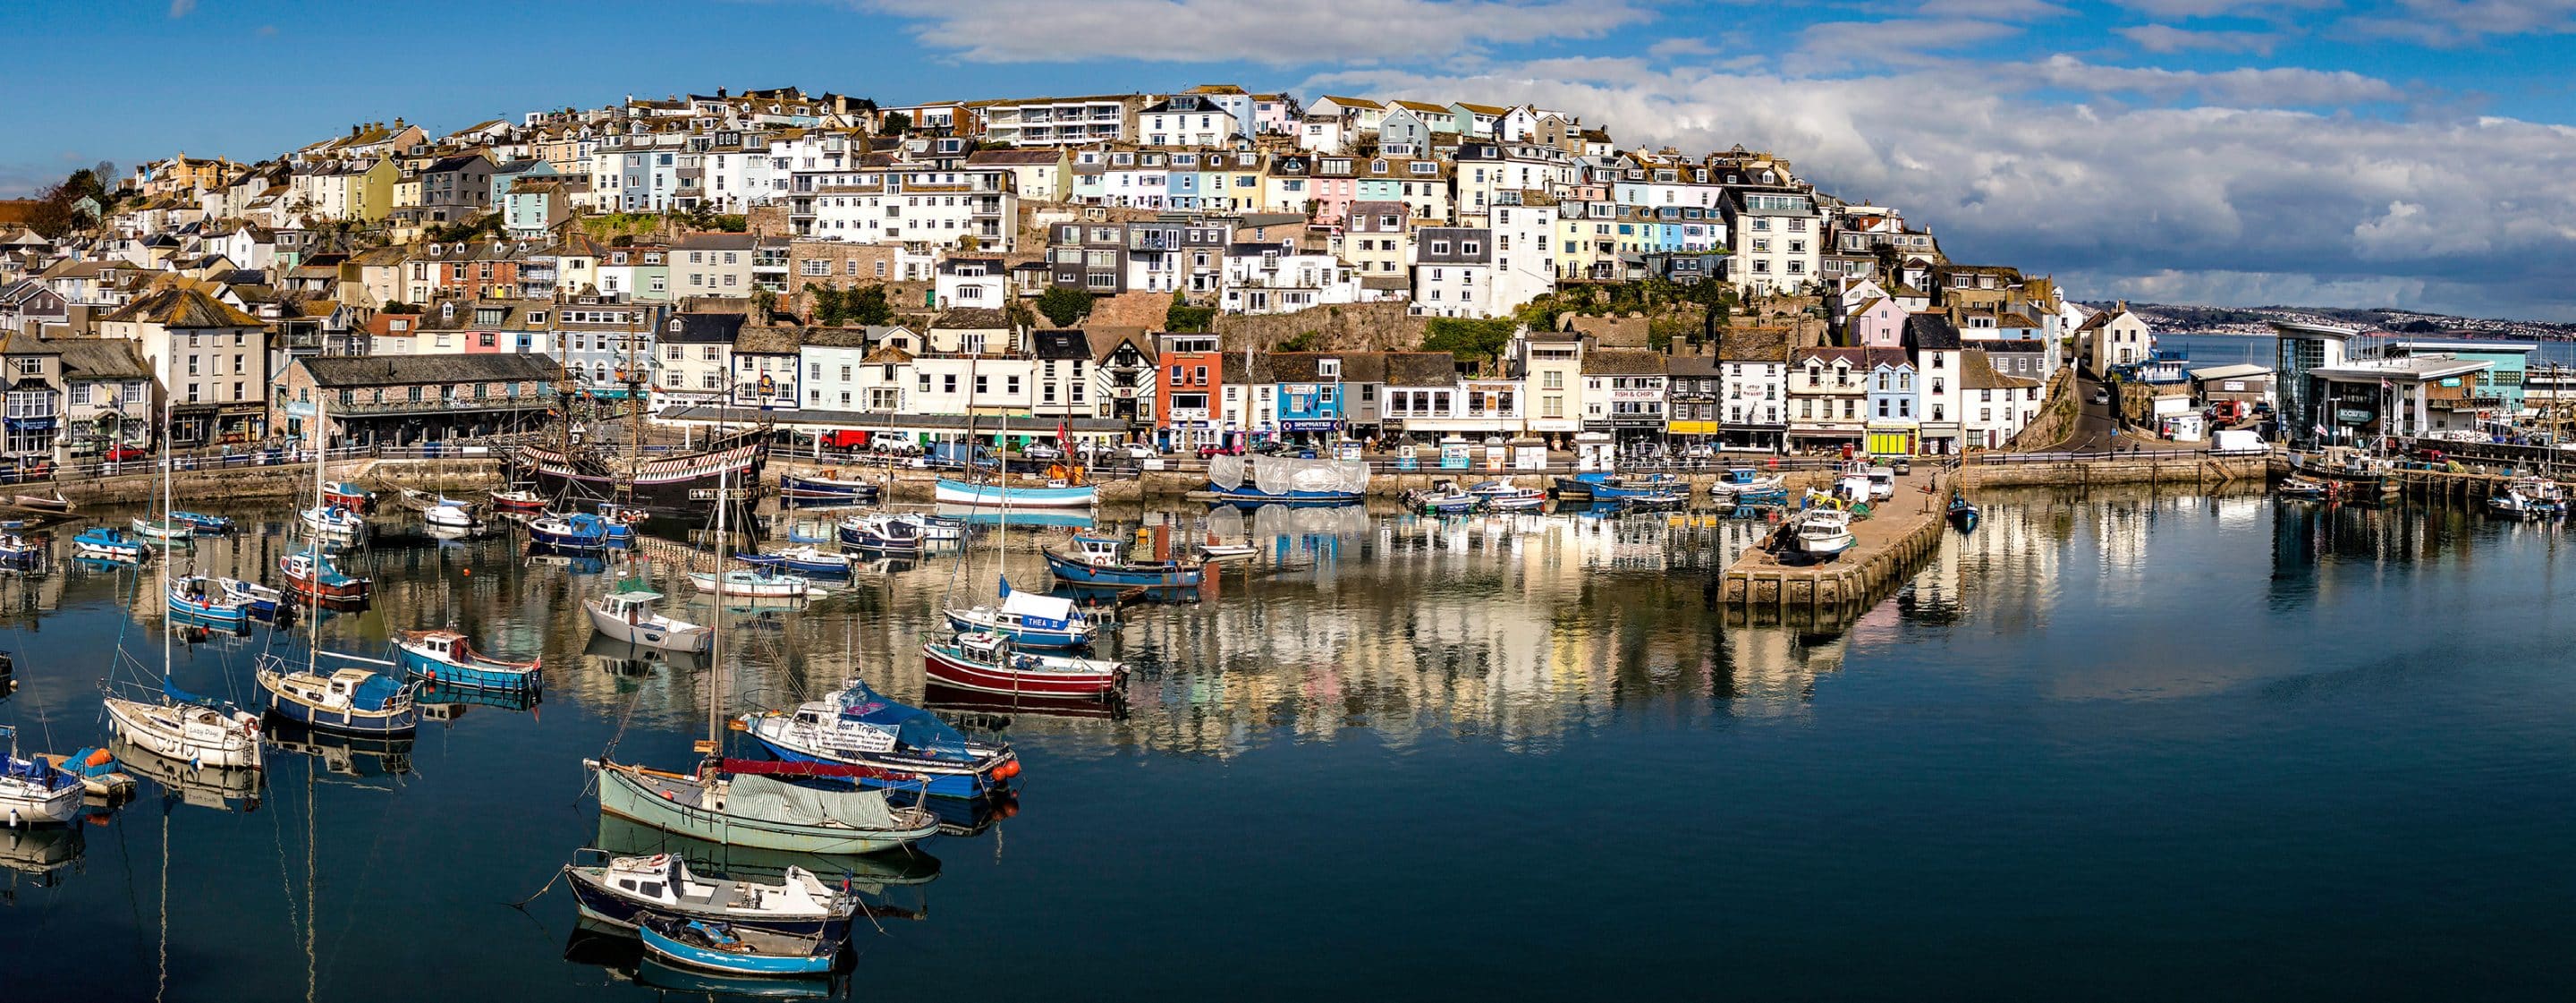 Holiday homes and holiday lets in South Devon Brixham